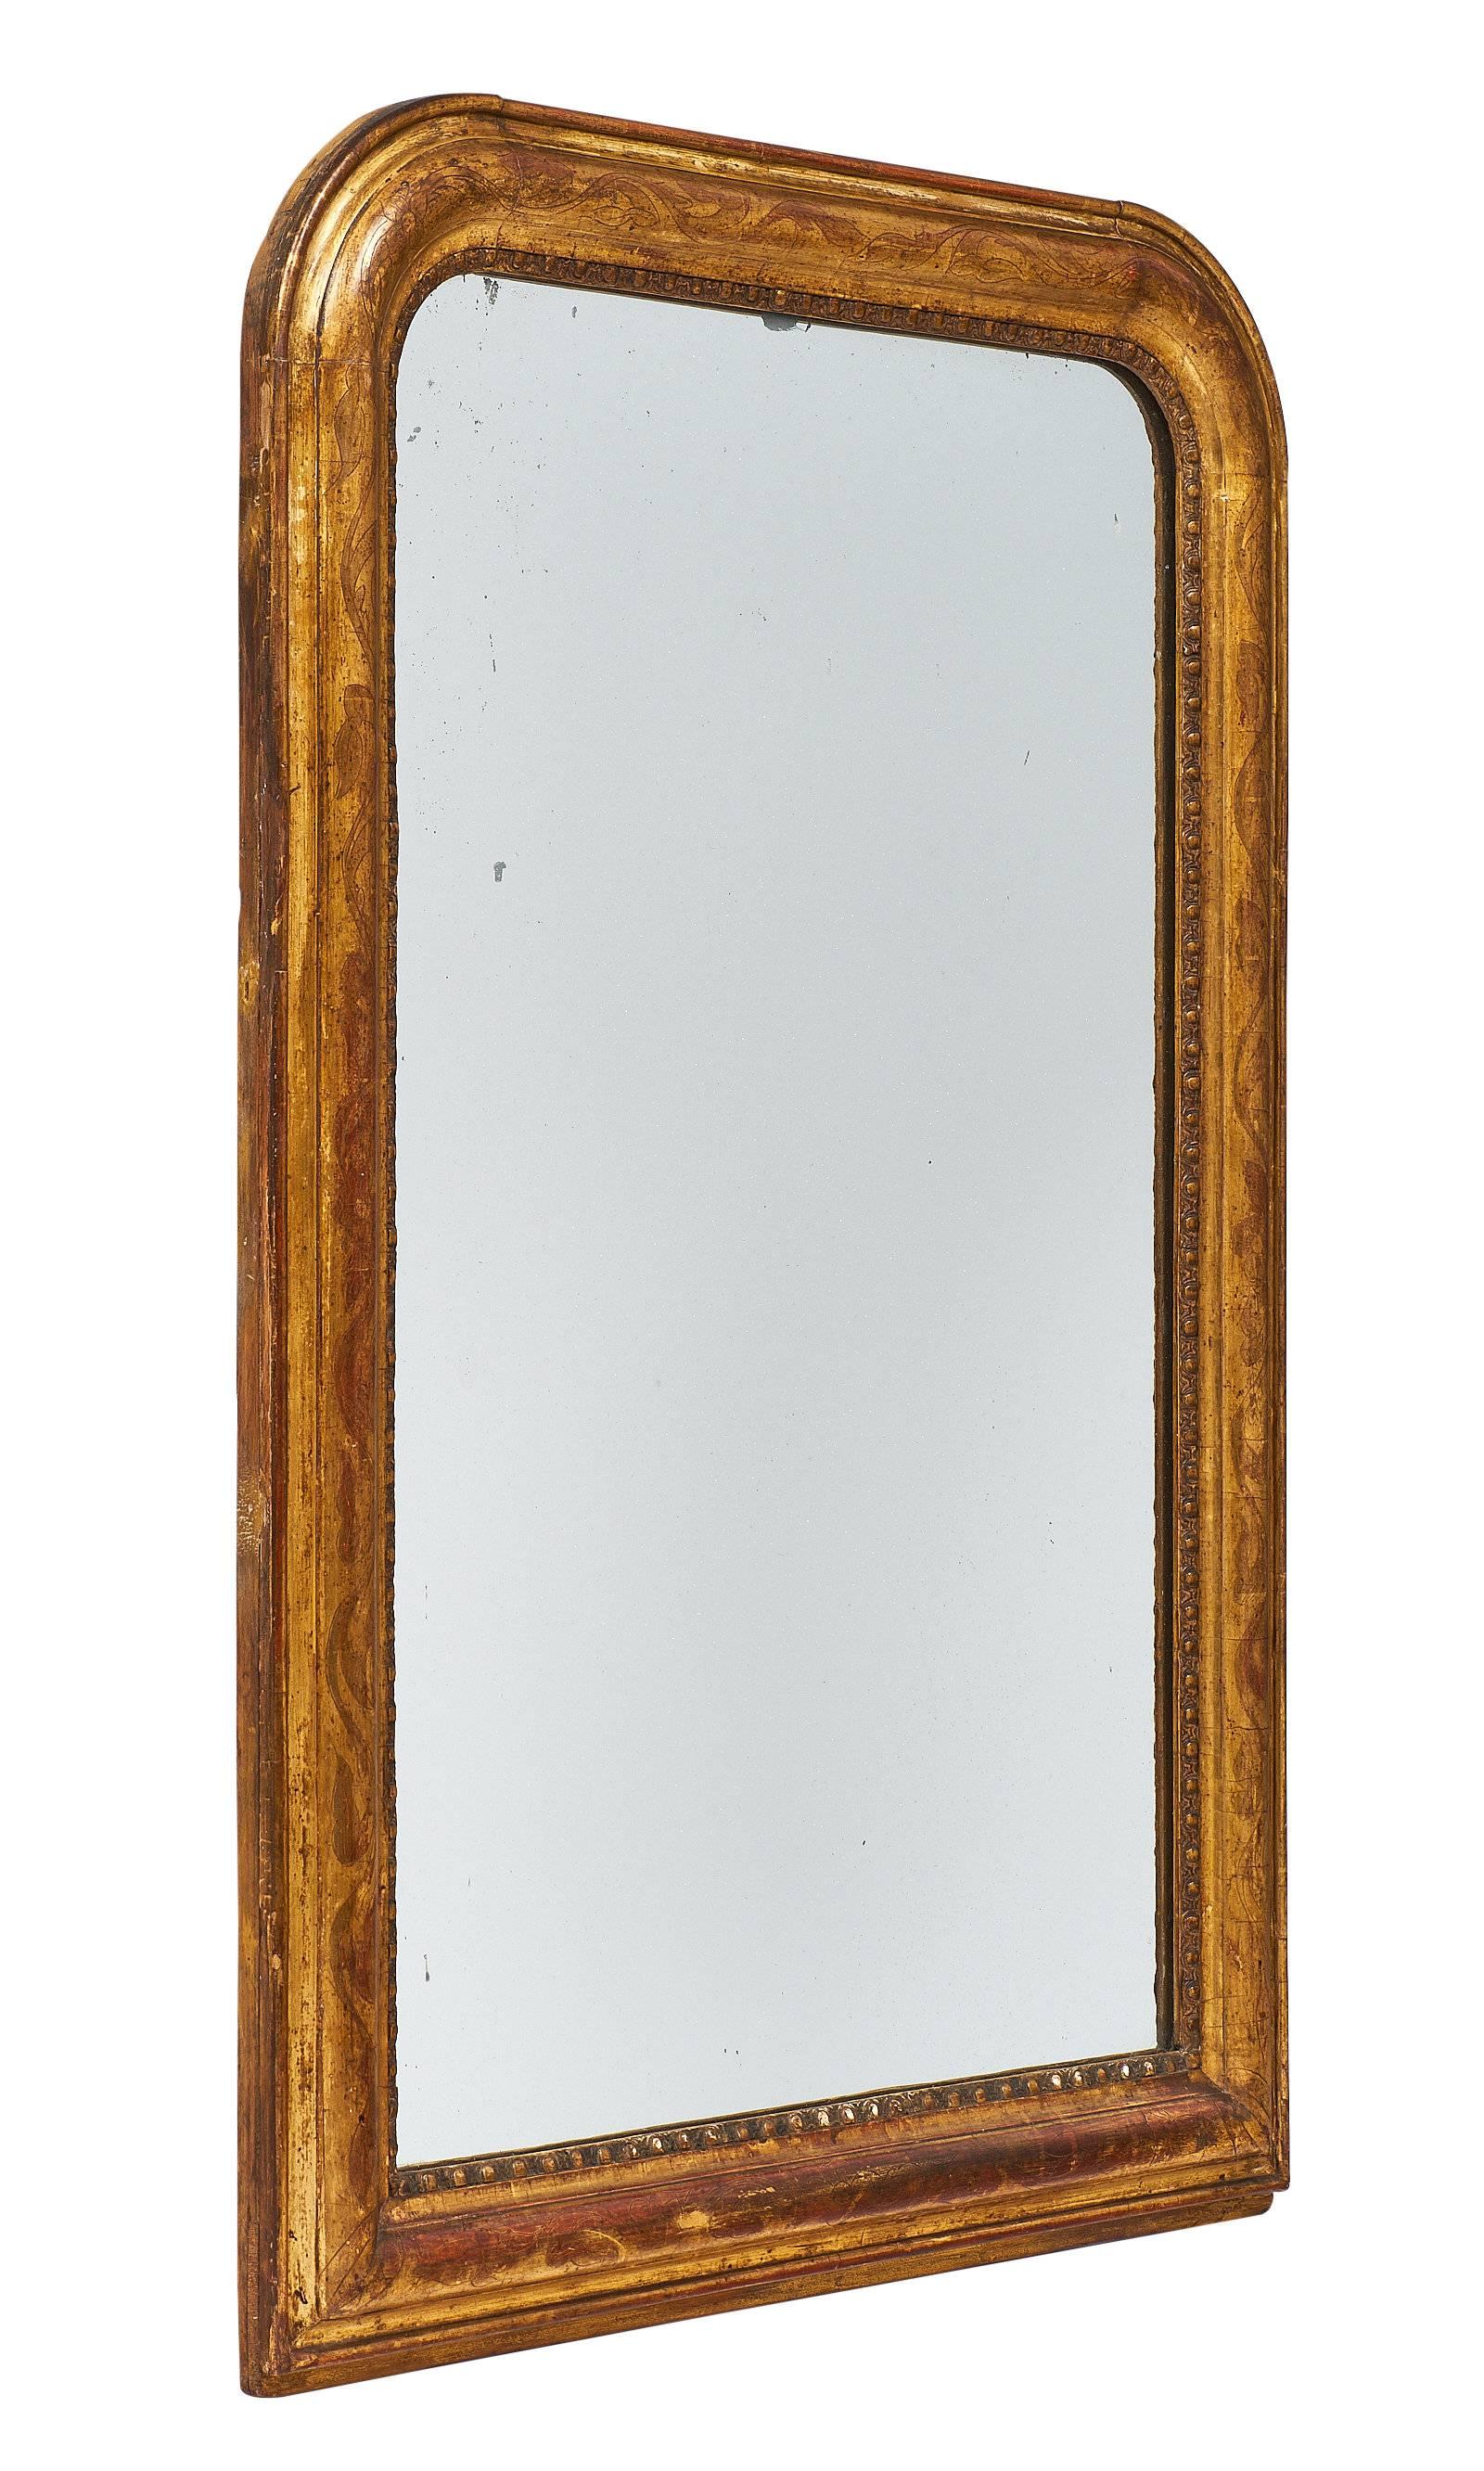 An original mid-19th century mirror from the Louis Philippe era. The mirror is original and the frame is in beautiful condition, showing a perfect patina. The sienna colored glaze coming through the 23-karat gold leafing creates a luminous and warm